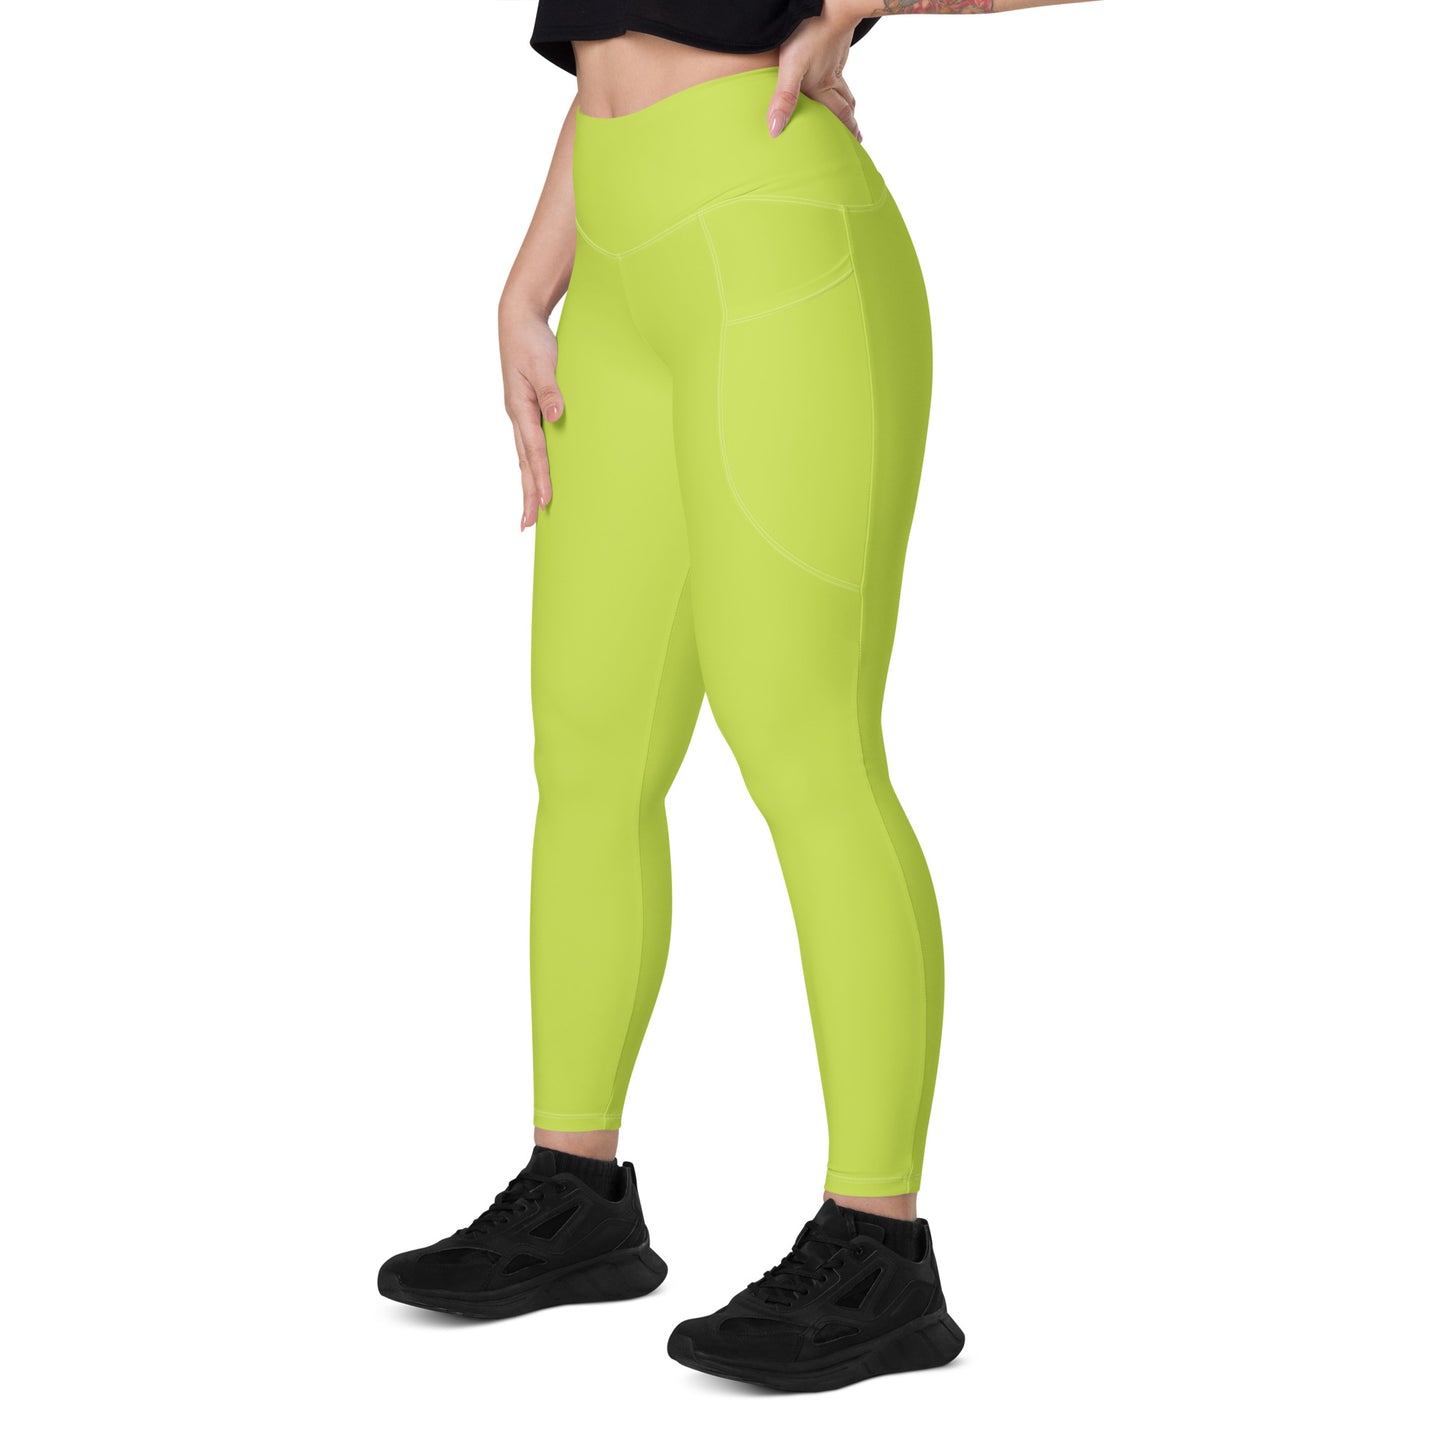 Dogri Leggings with pockets